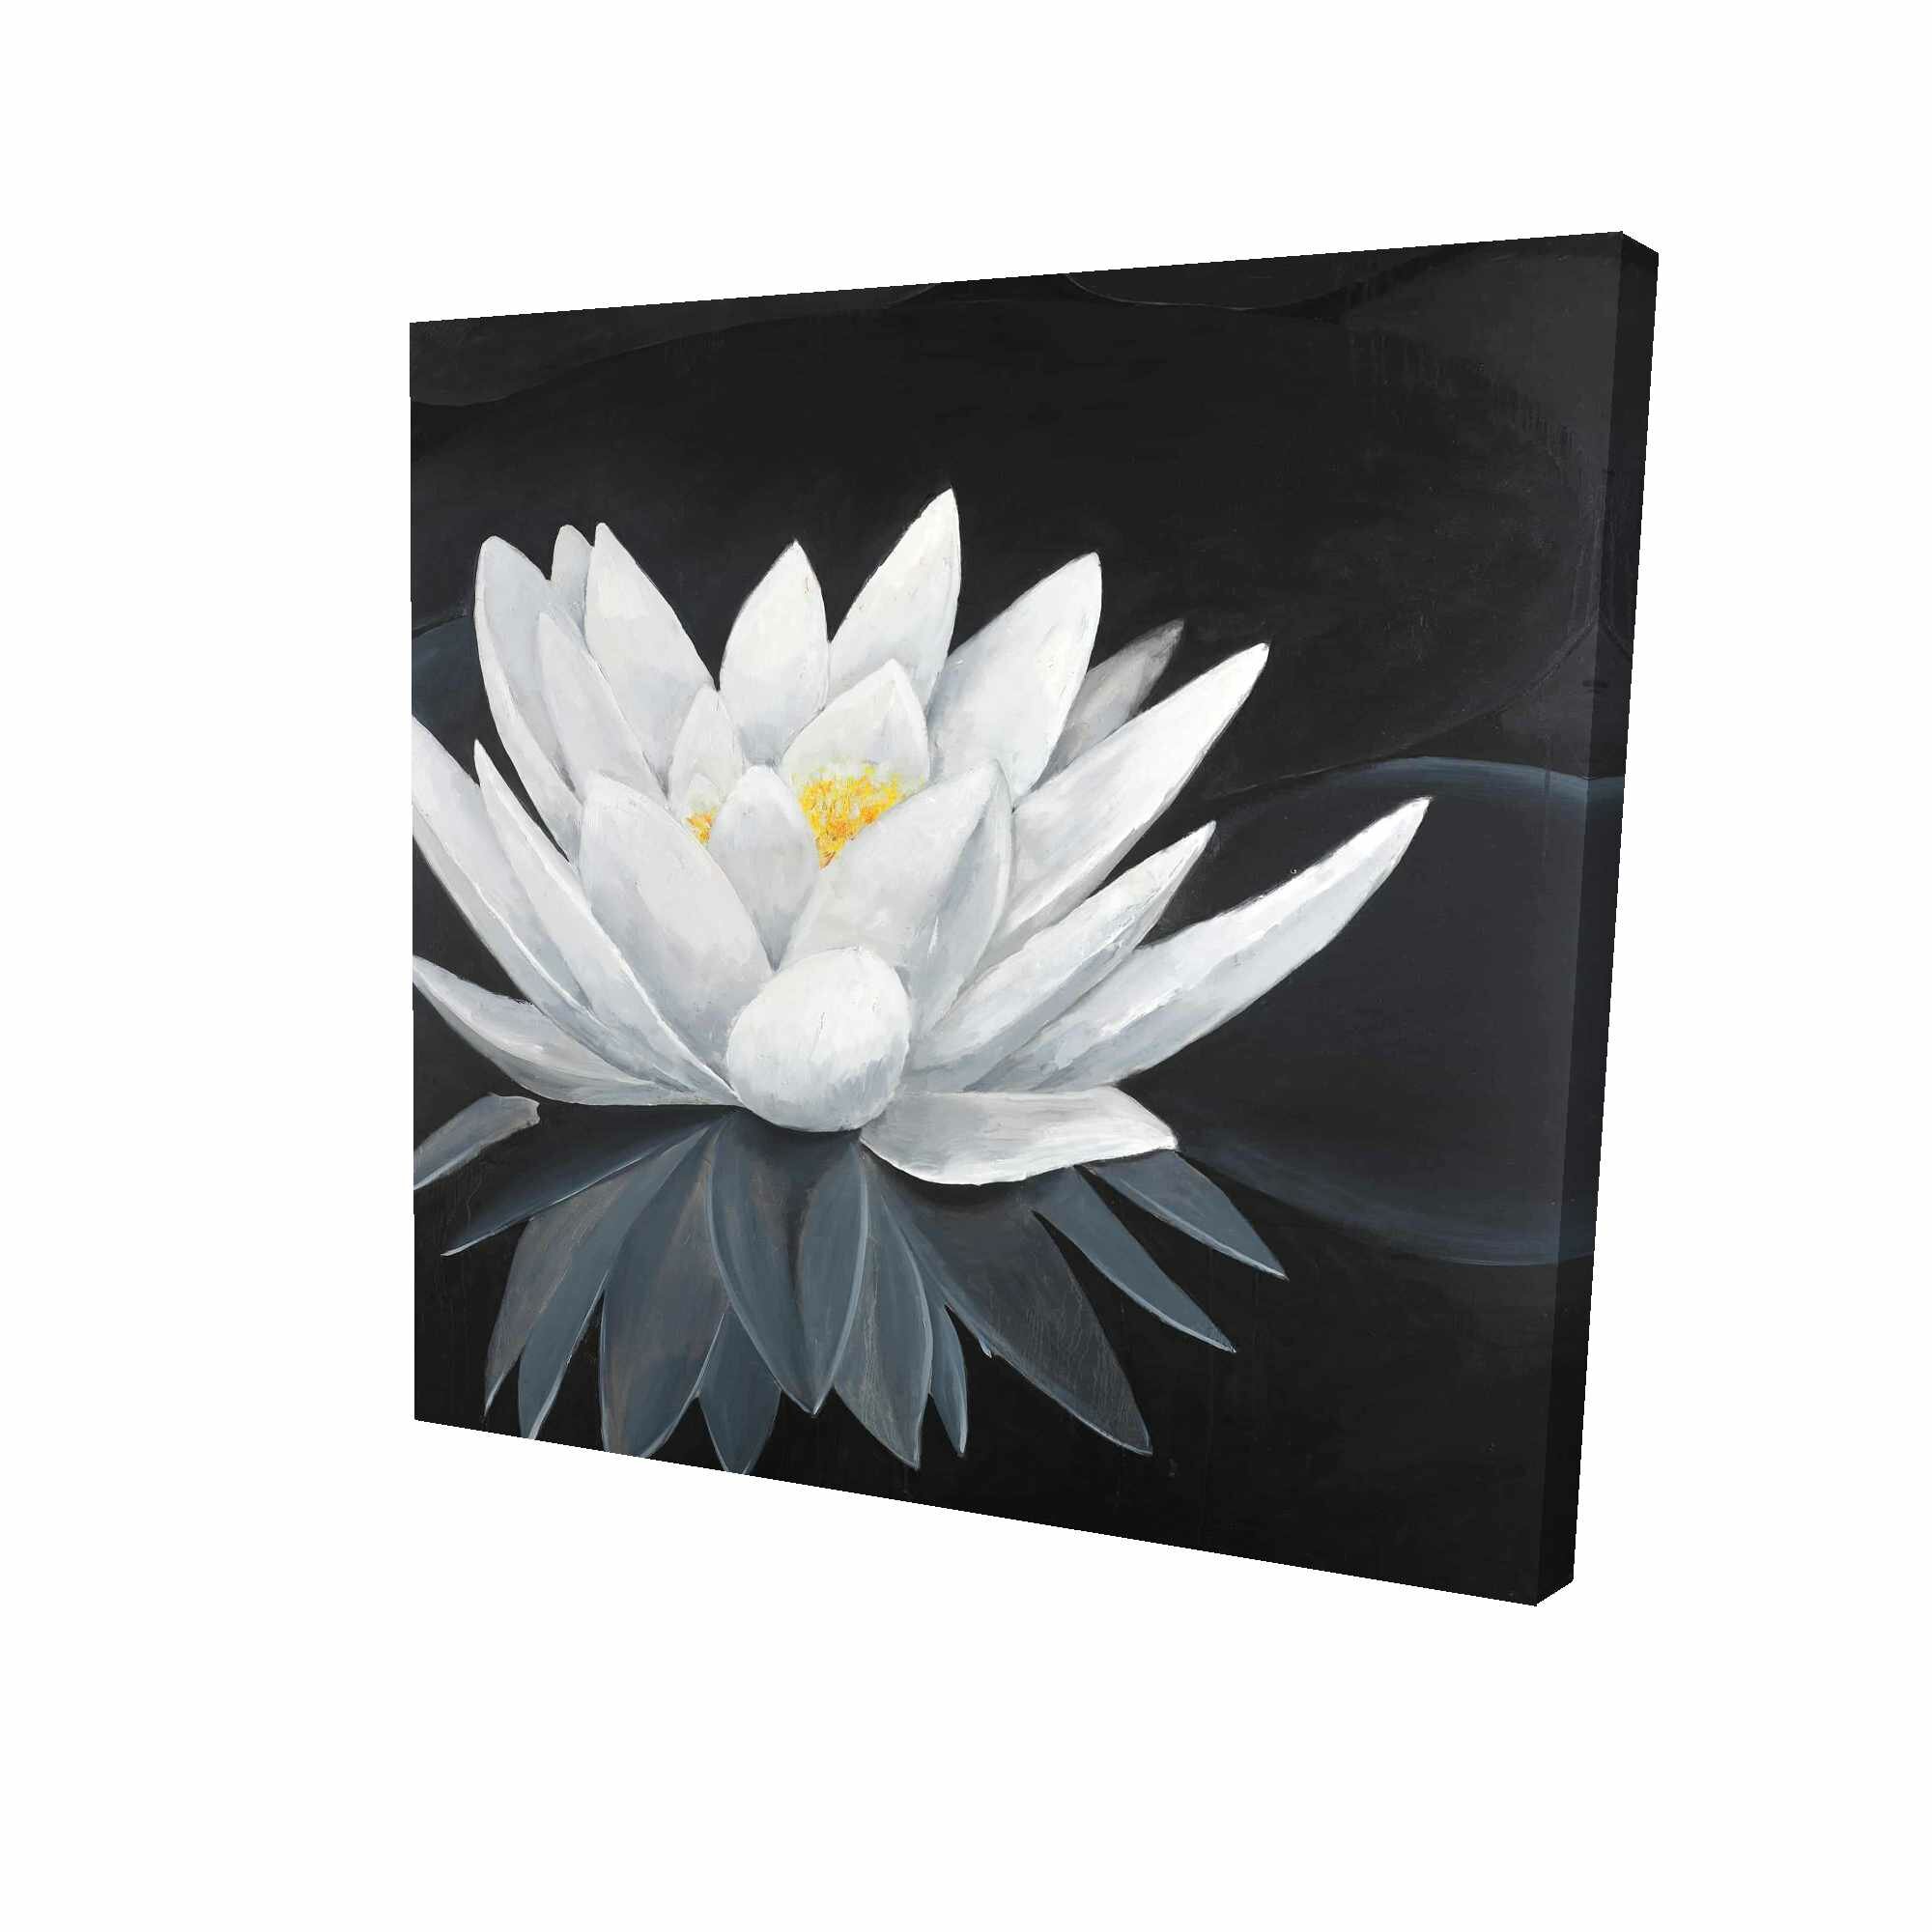 Picture Painting on Canvas Print Stretched and Framed,Ready to Hang Spirit Up Art Large Black and White Watercolor Painting of Lotus Modern Home Decorations Wall Art set of 3 Each is 50*50cm #D04-425 Espritte Art SUArt0587 